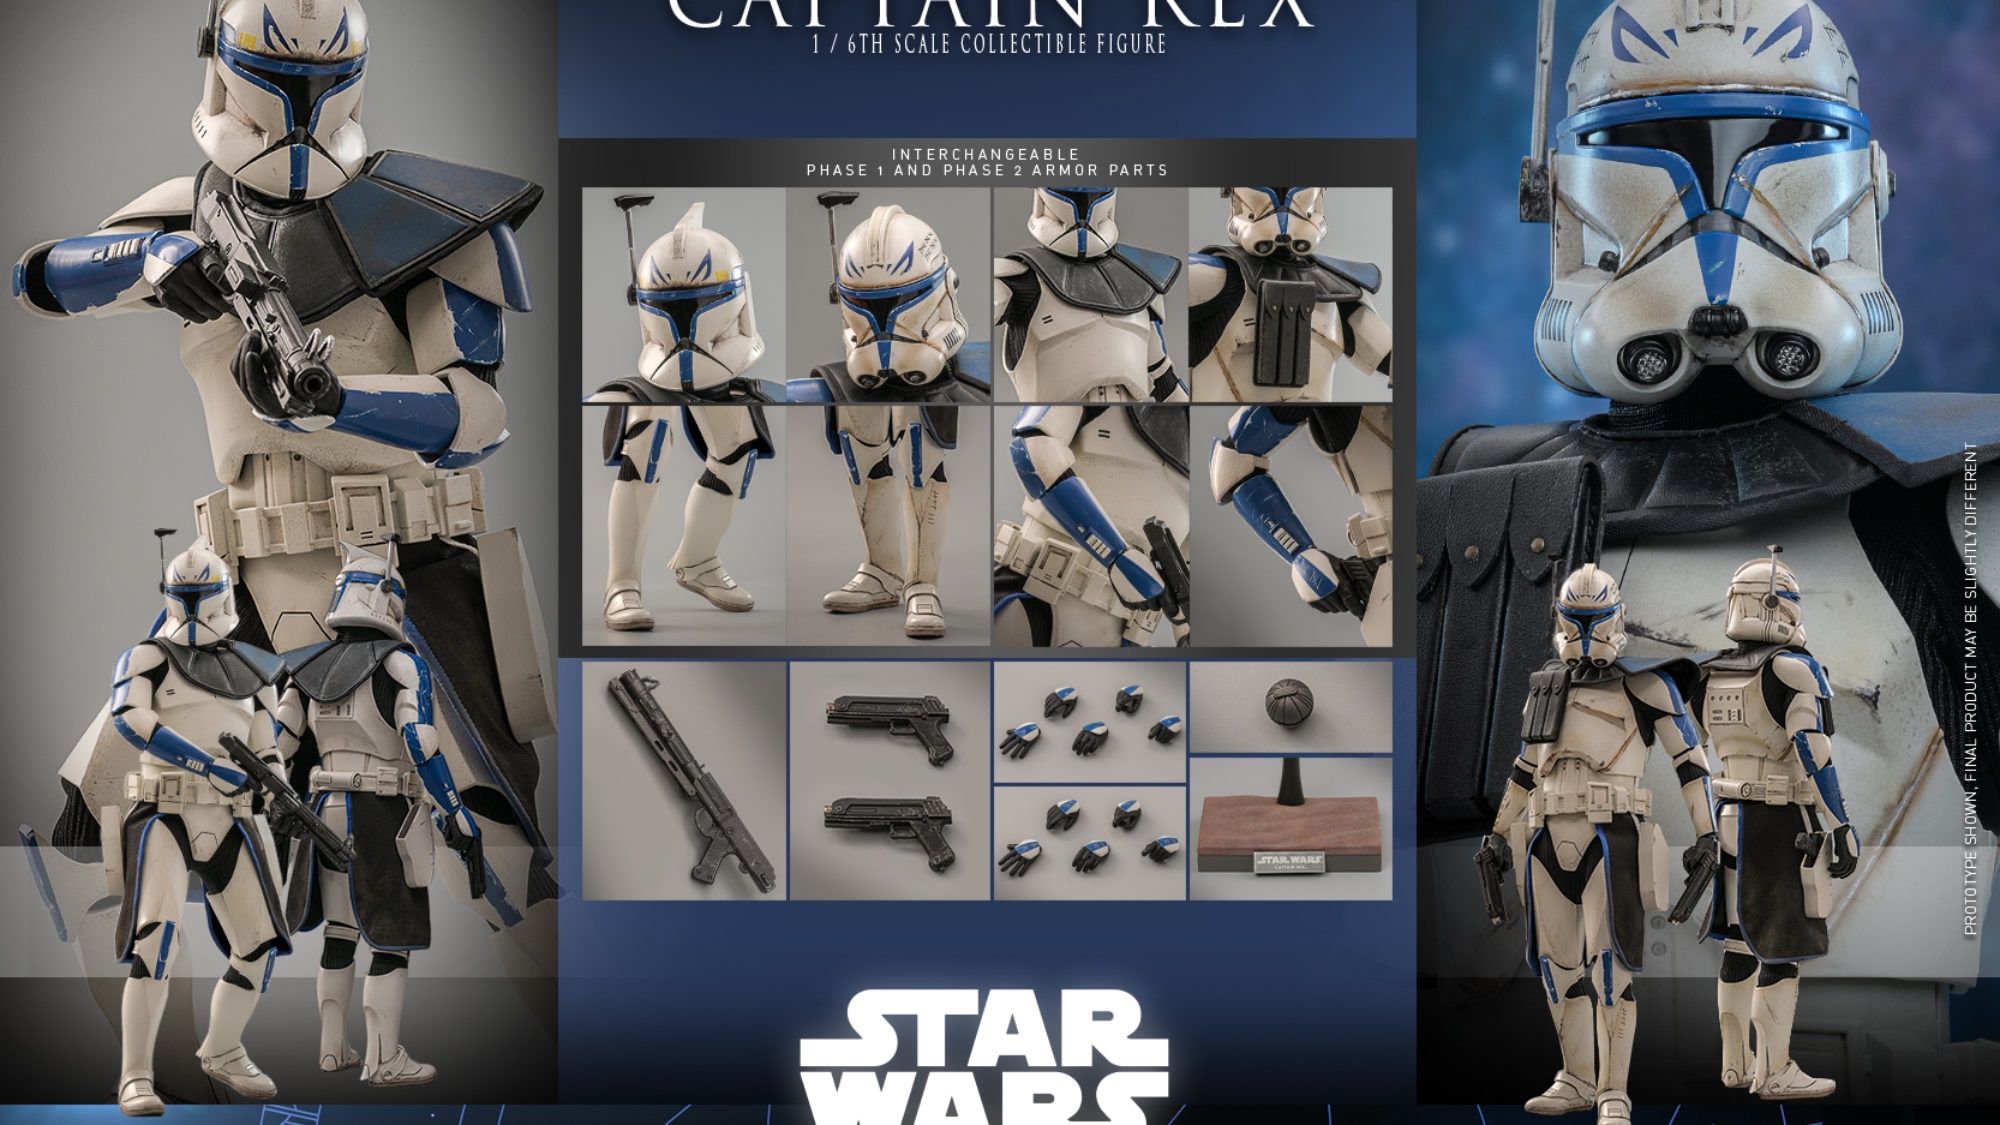 Captain Rex Returns to Hot Toys with New Star Wars 1/6 Scale Release